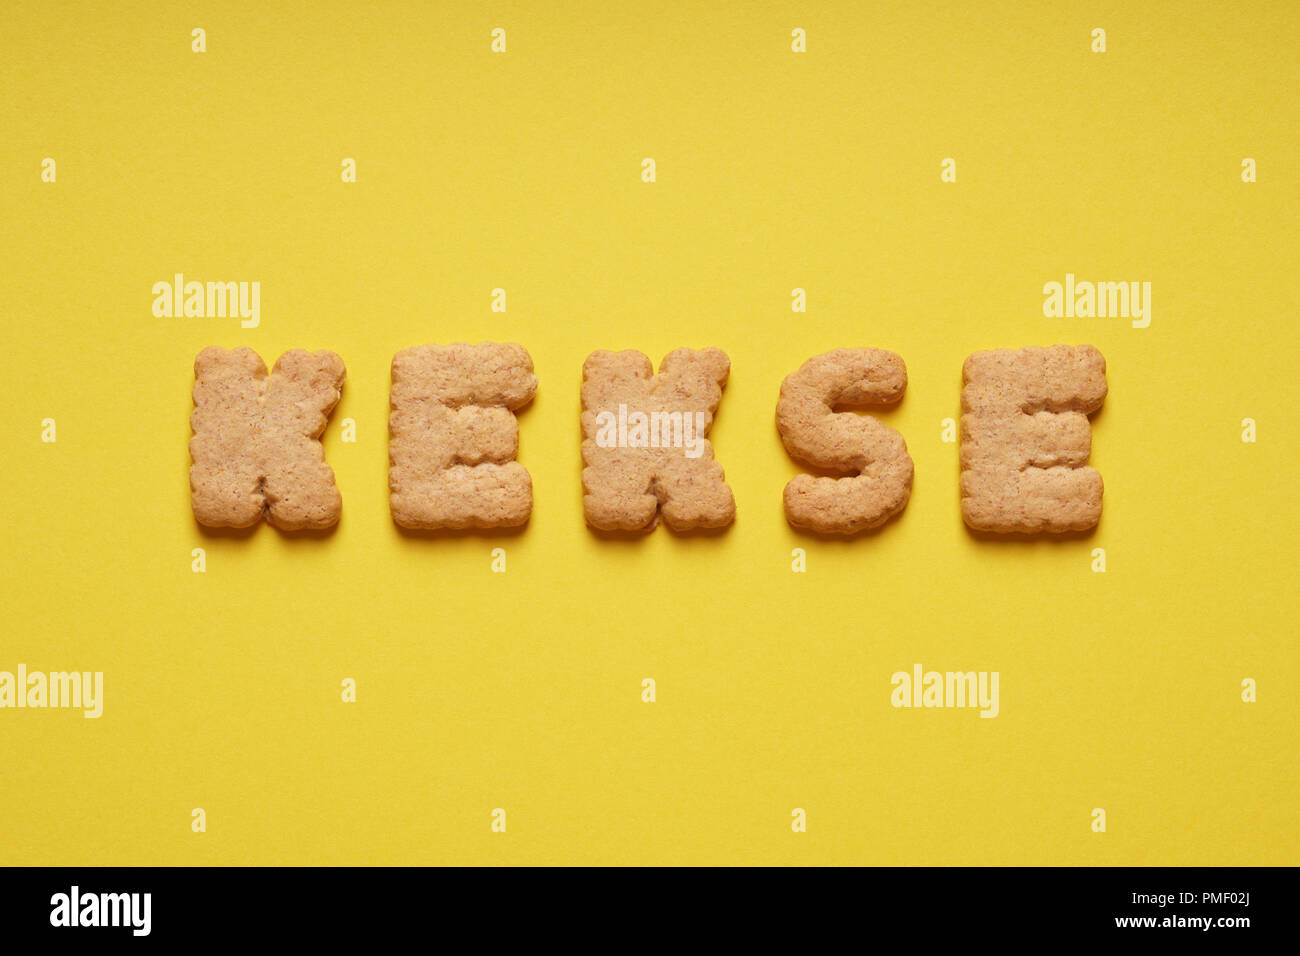 kekse is the german word for cookies or biscuits, spelled out with cookie letters or characters on yellow paper background Stock Photo